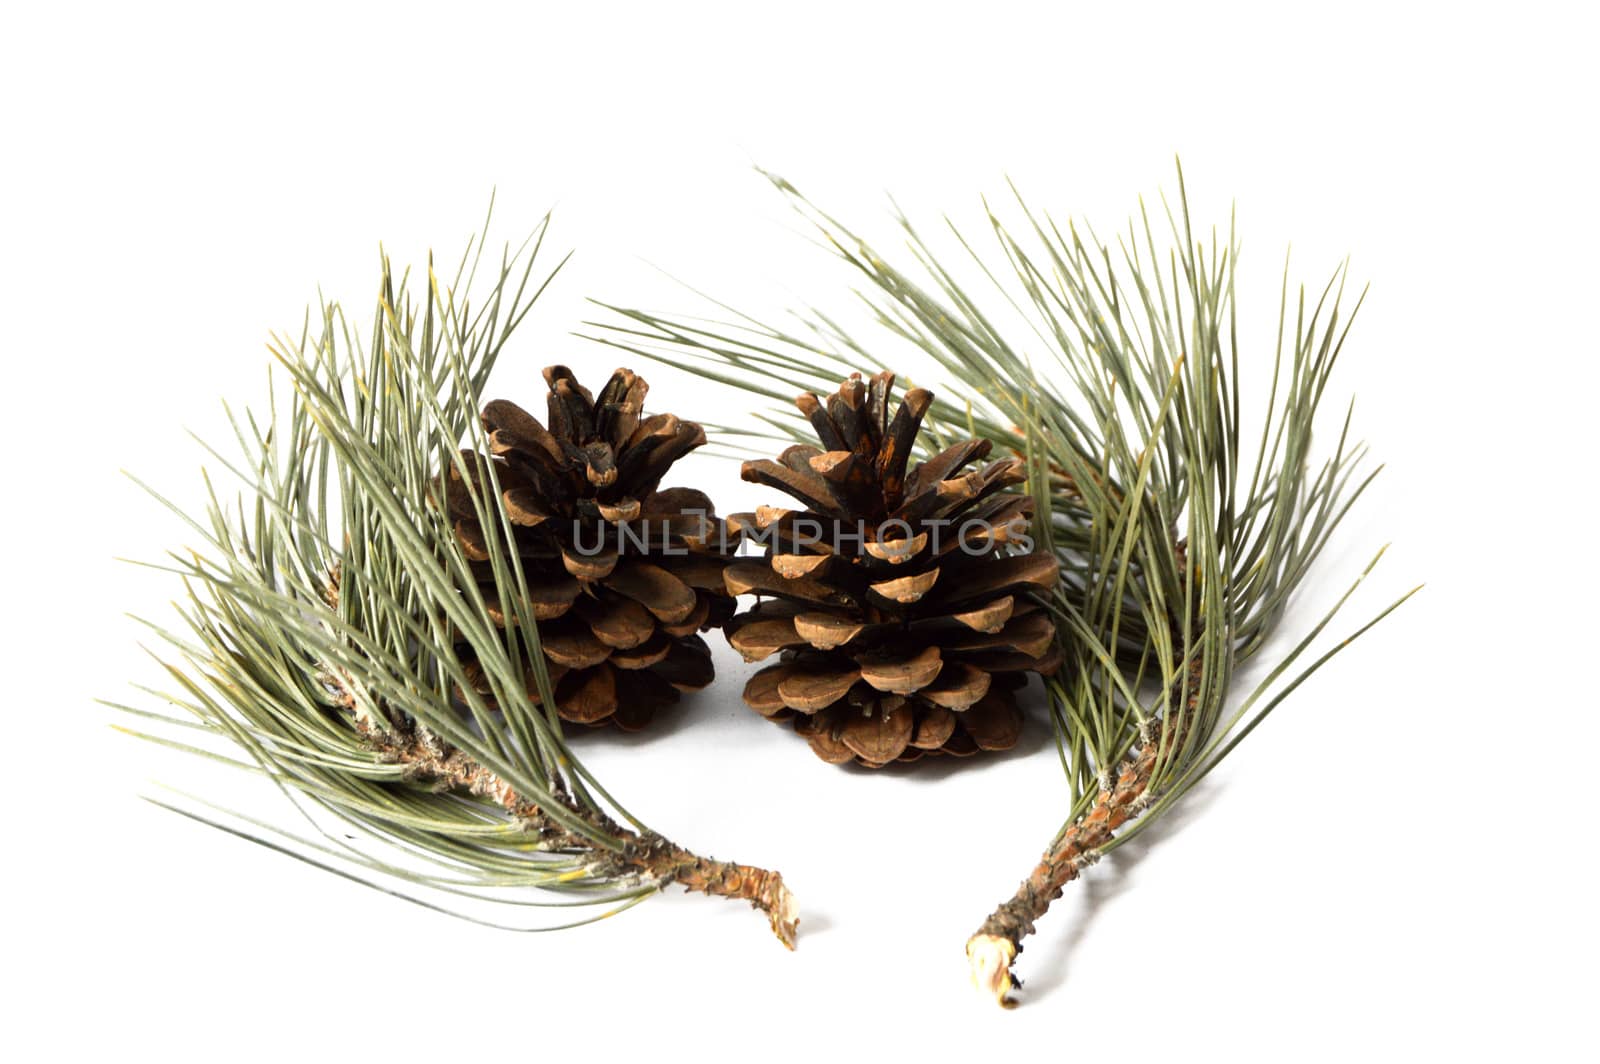 Pictures of pine cones by nhatipoglu